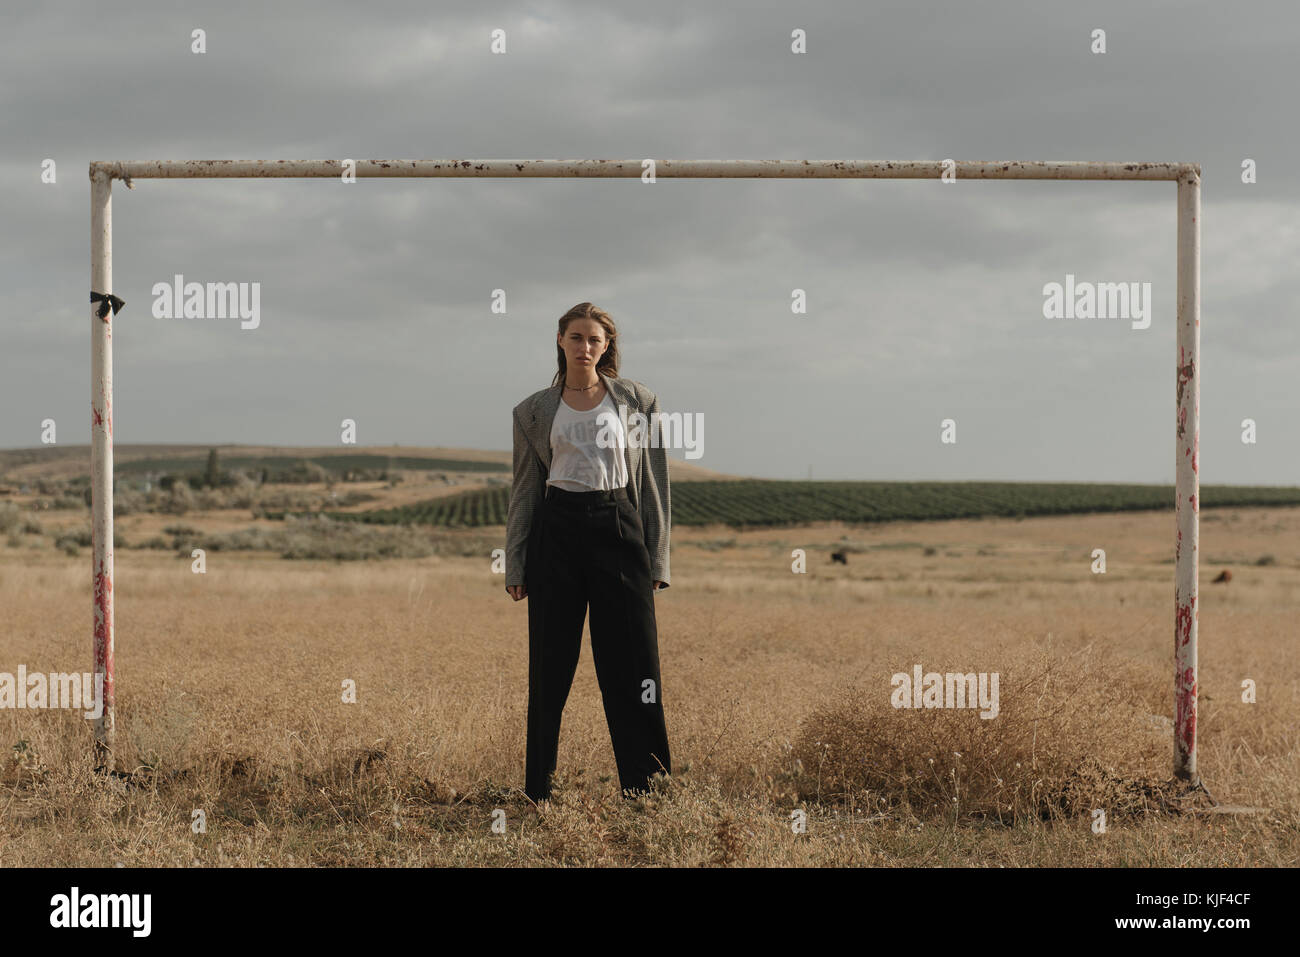 Serious location woman standing in worn soccer goal Stock Photo